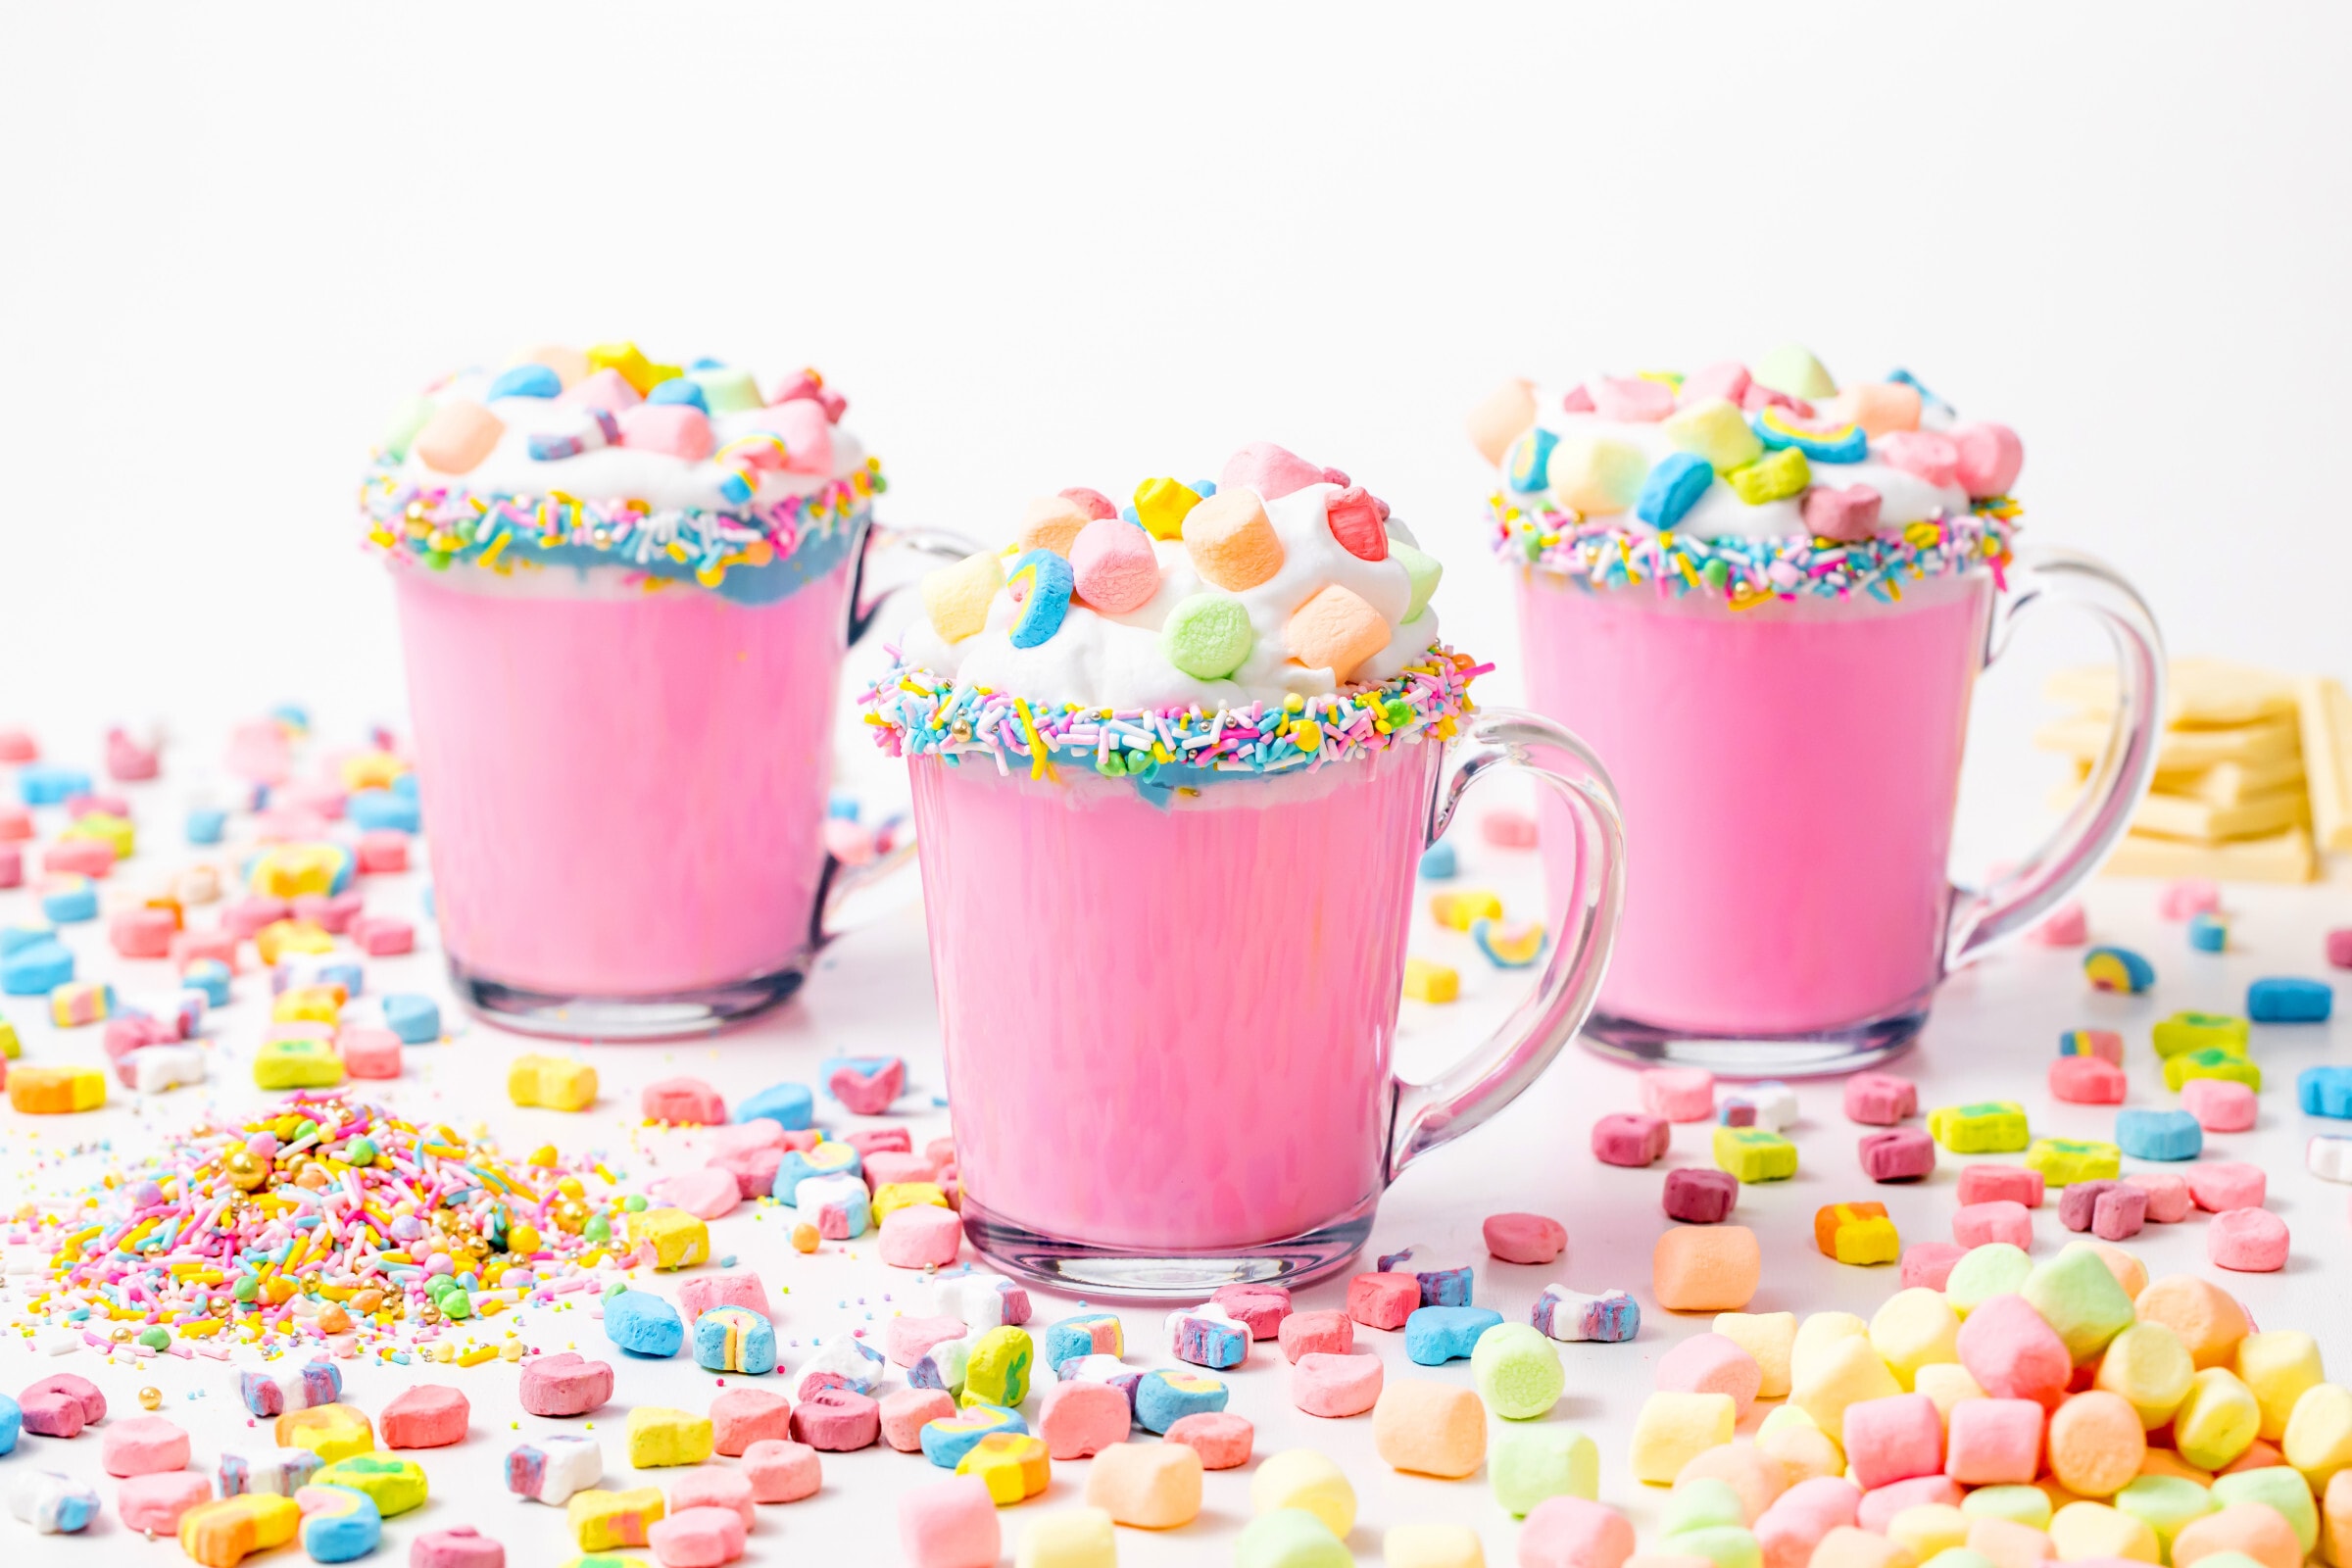 This unique, fun and easy unicorn hot chocolate will make all the